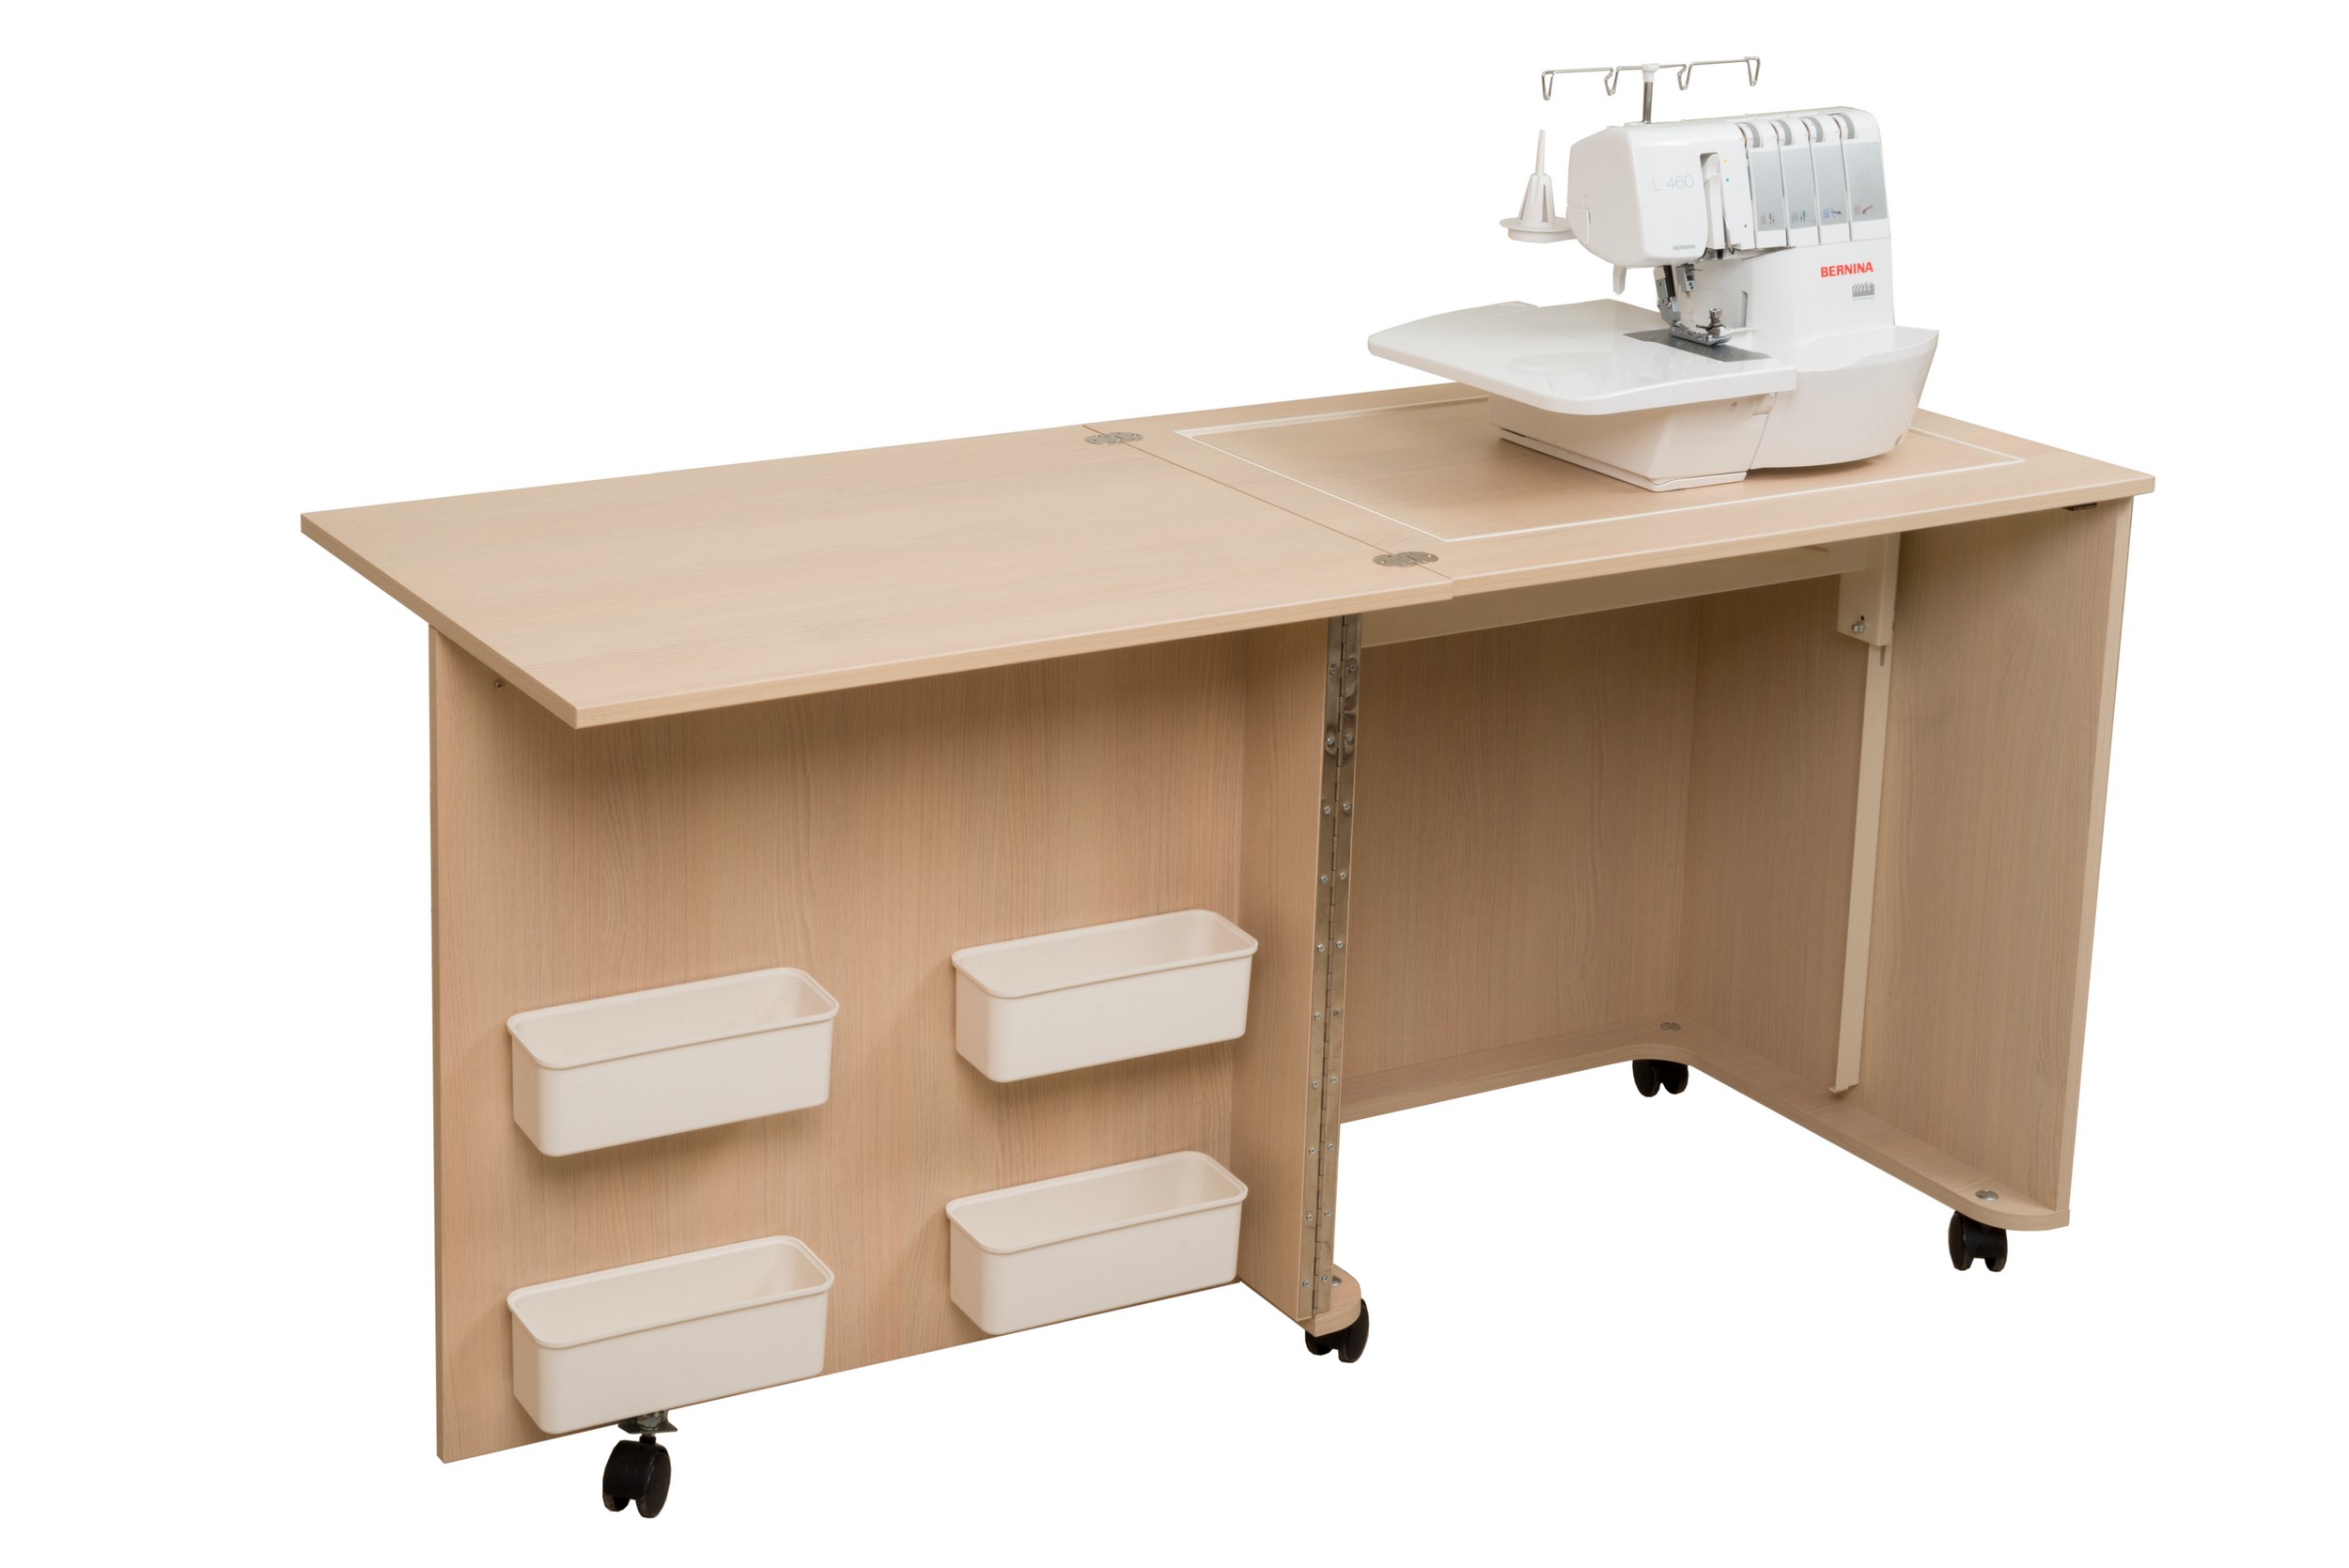 Sewing Table Selection Criteria